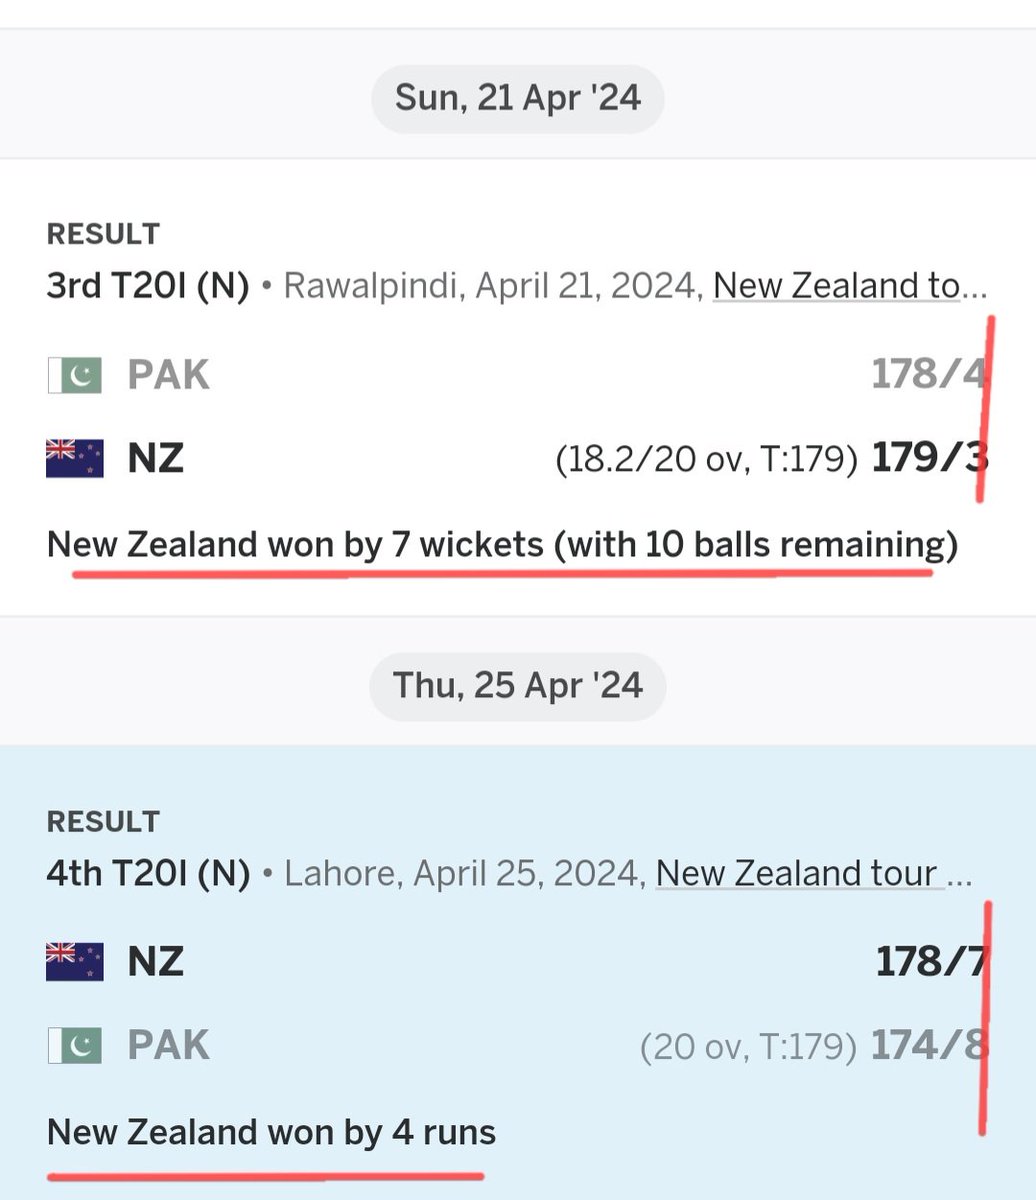 Head Hangs in Shame! Sad day for Pak cricket. We have lost twice to a 'C-Team' or 'School Boys-Team' from NZ! The fault lies with ex-Chairman MC Zaka Ashraf and his left overs that also includes CS Wahab Riaz. Zaka sowed seeds of division in the Pak team. Now @mohsinnaqviC24